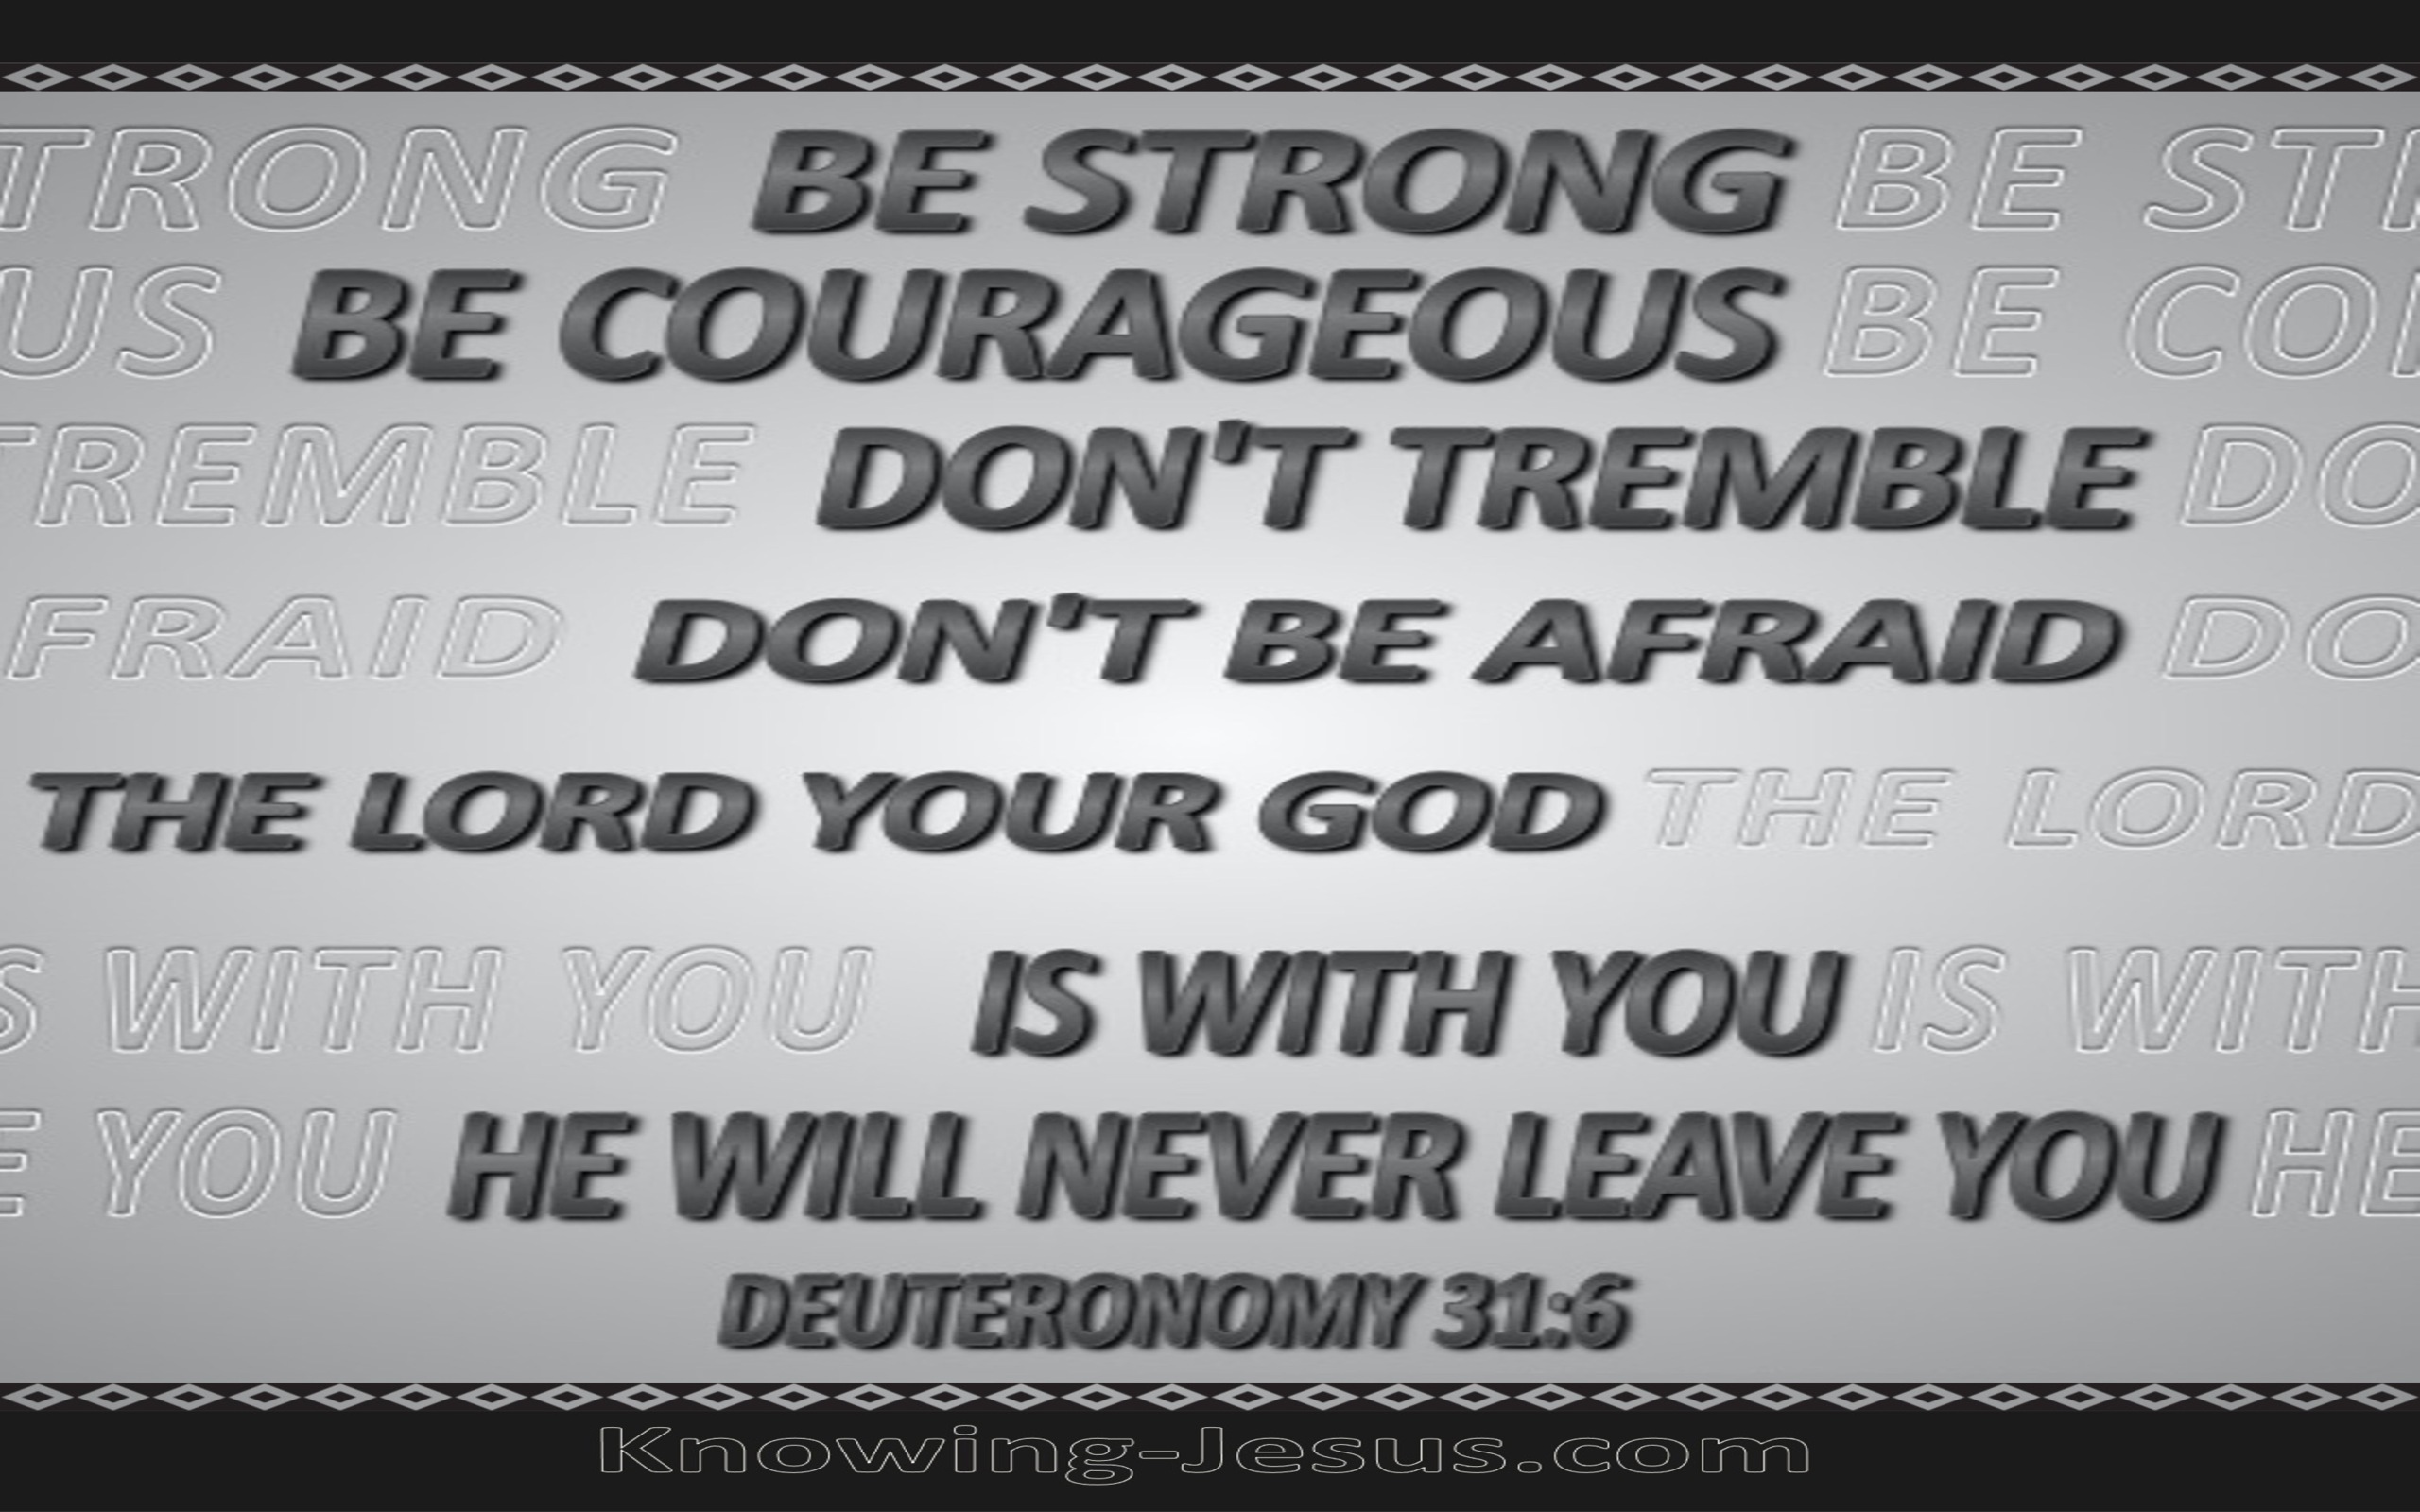 Deuteronomy 31:6 Strong and Courageous (gray)